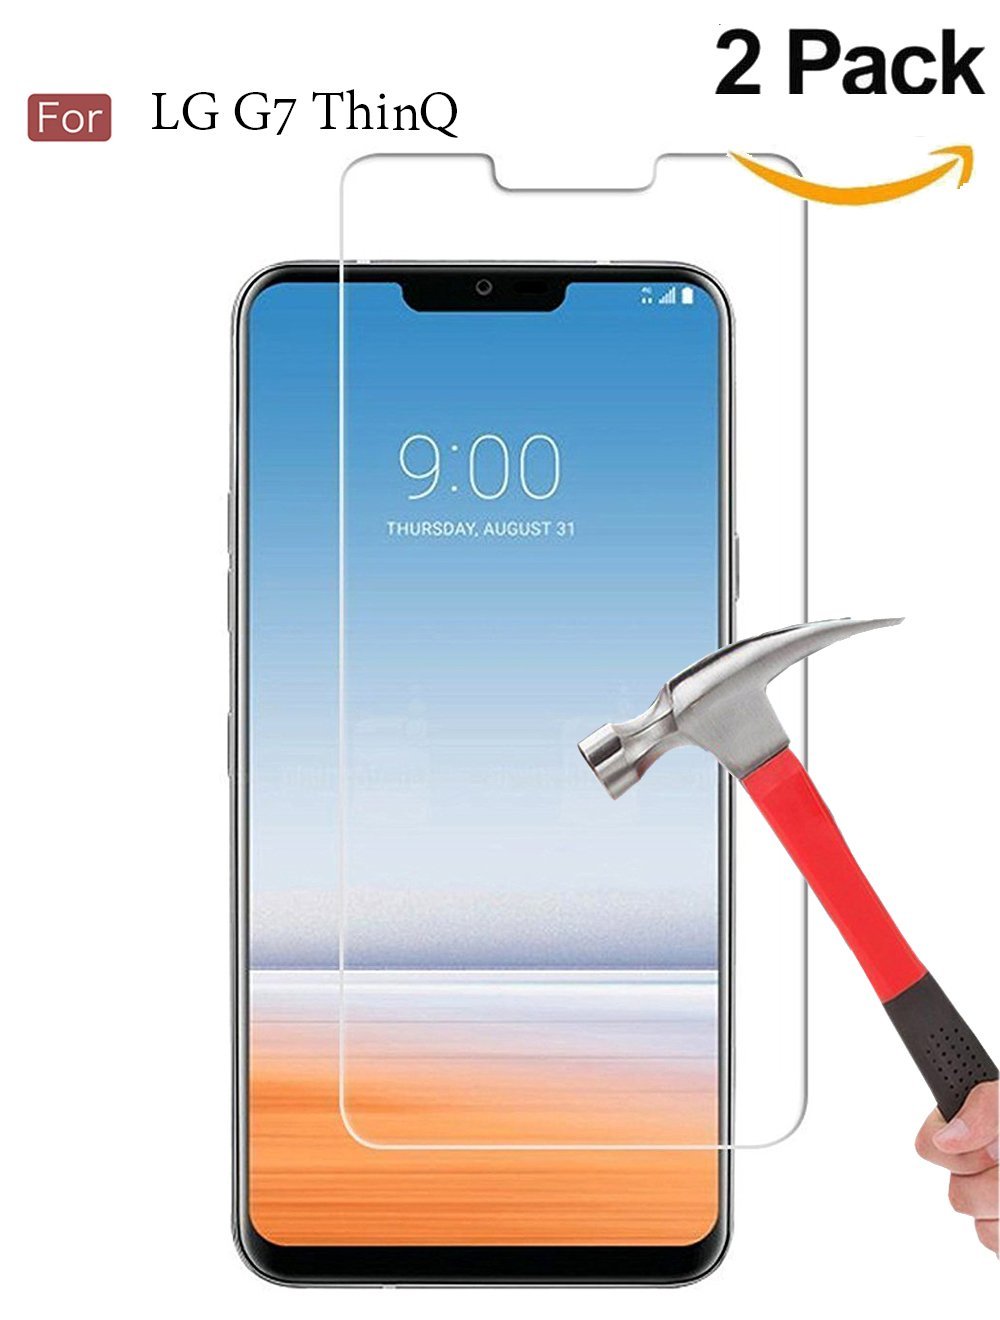 The Grafu Screen Protector for LG G7 ThinQ Abrasion Resistance Anti Scratch 9H Hardness Screen Protector for LG G7 ThinQ 4 Pack Tempered Glass